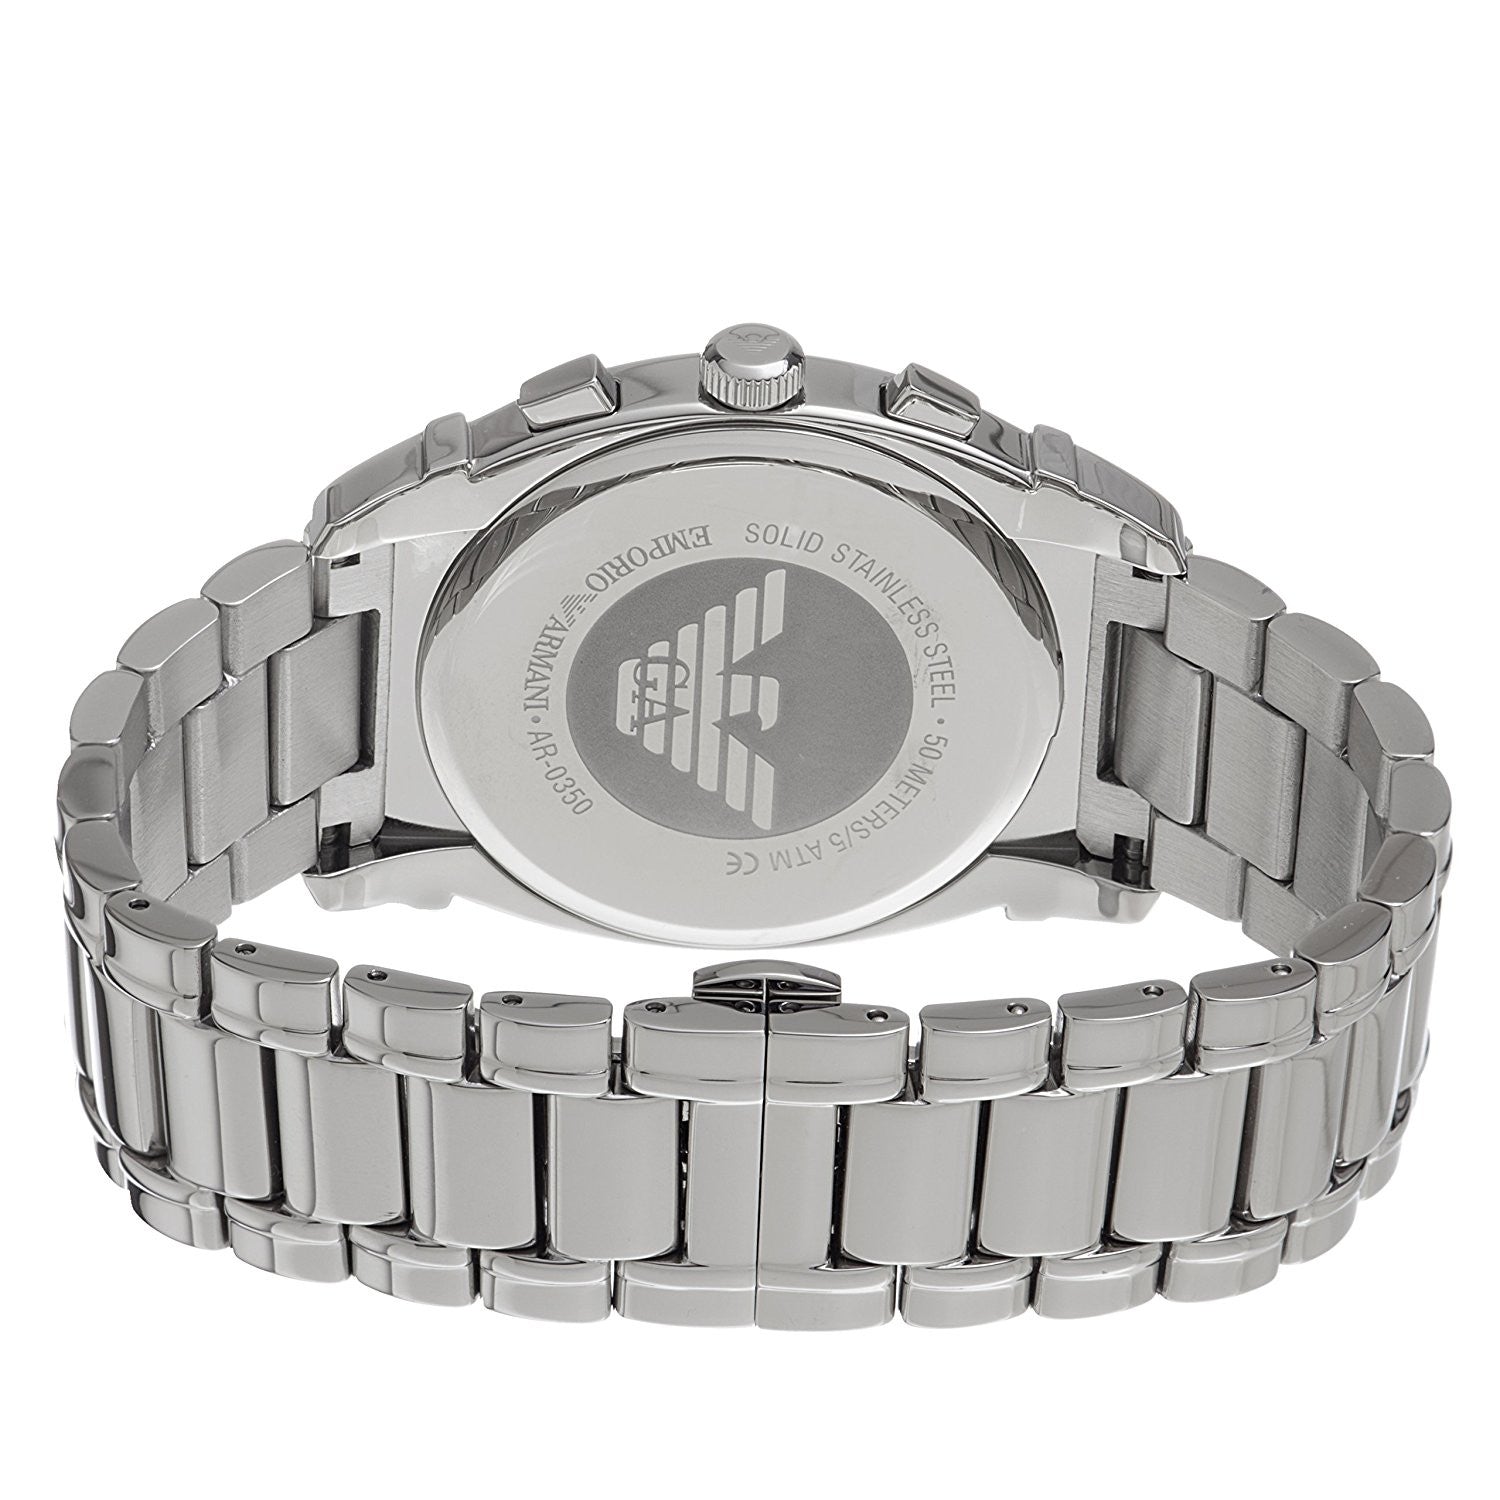 emporio armani solid stainless steel 50 meters 5 atm